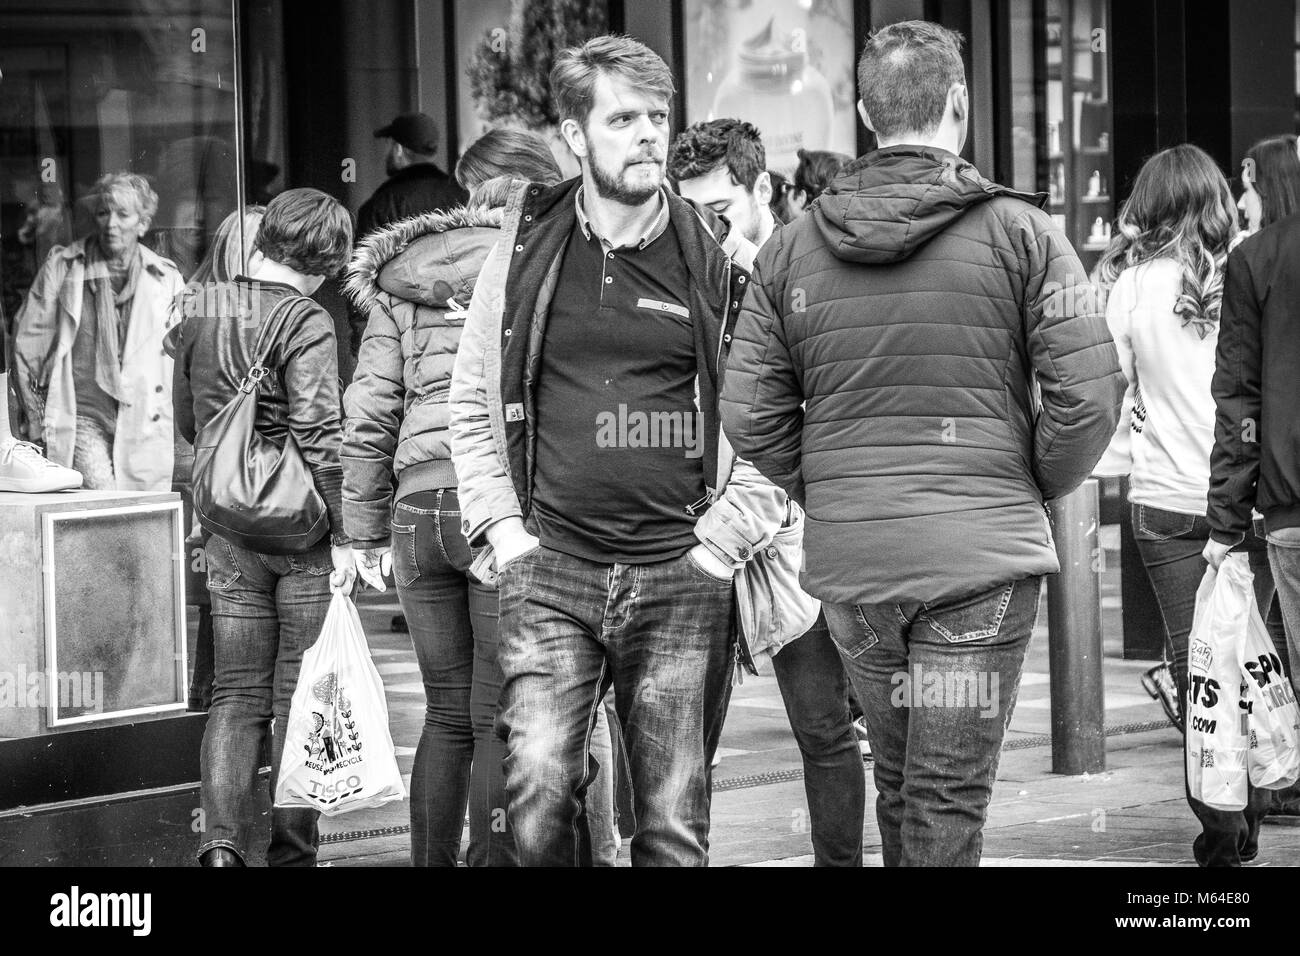 Shoppers in Liverpool. Shot in Black and white Stock Photo